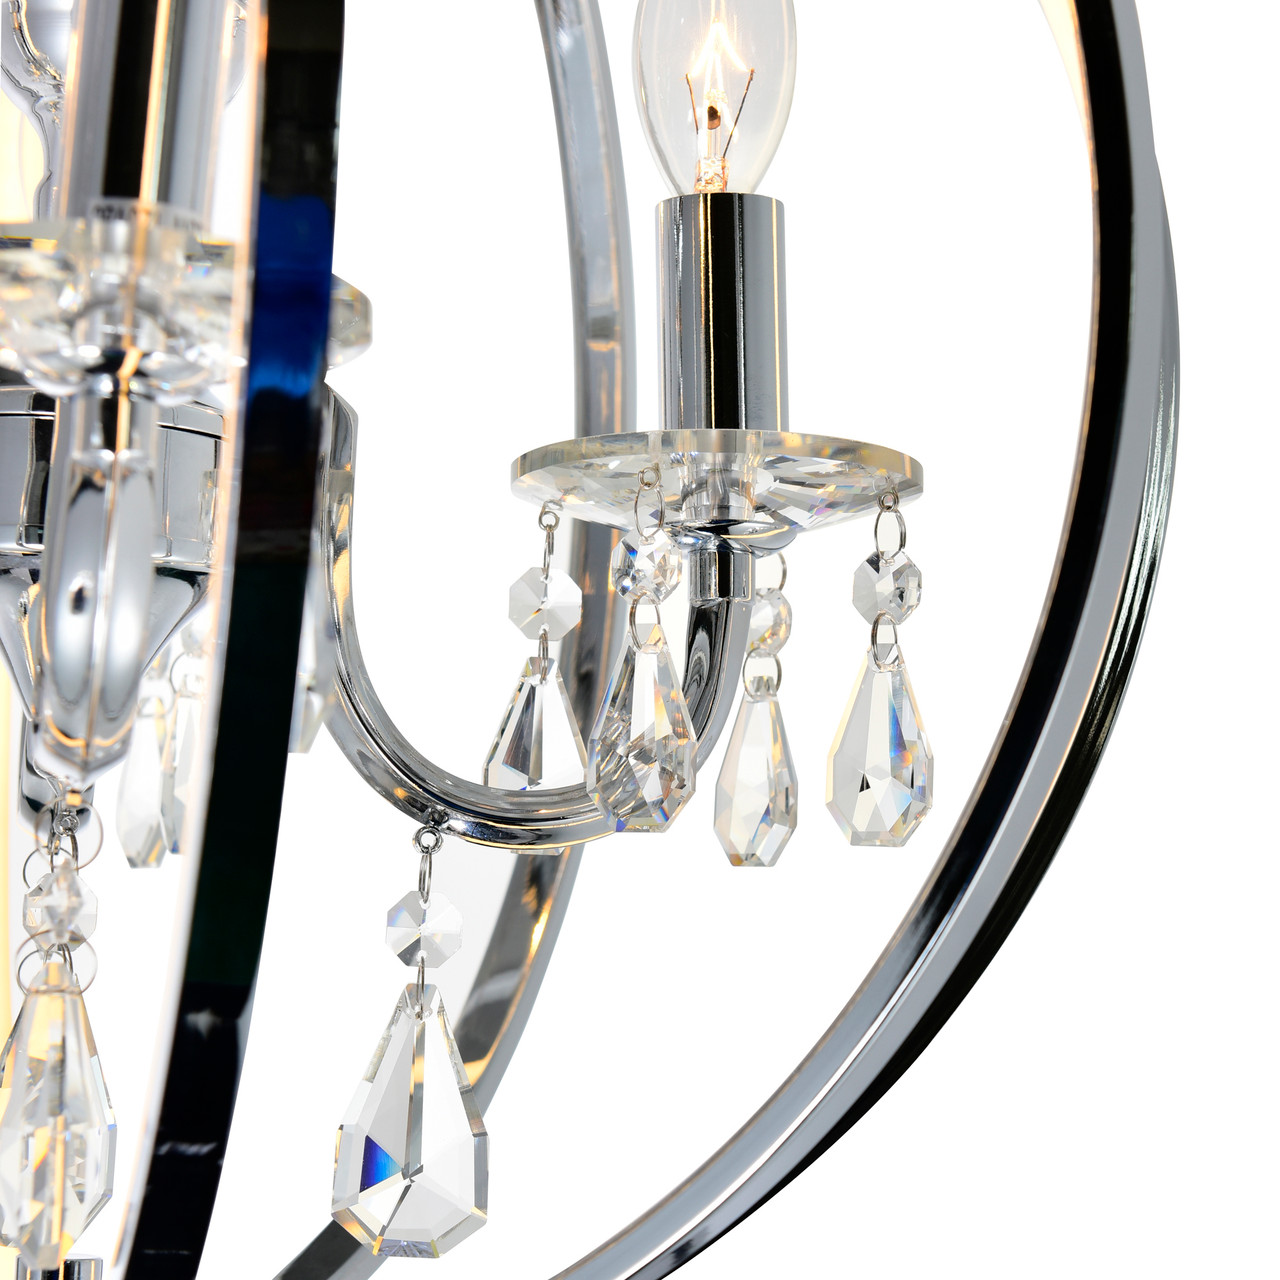 CWI LIGHTING 5025P16C-4 4 Light Up Chandelier with Chrome finish